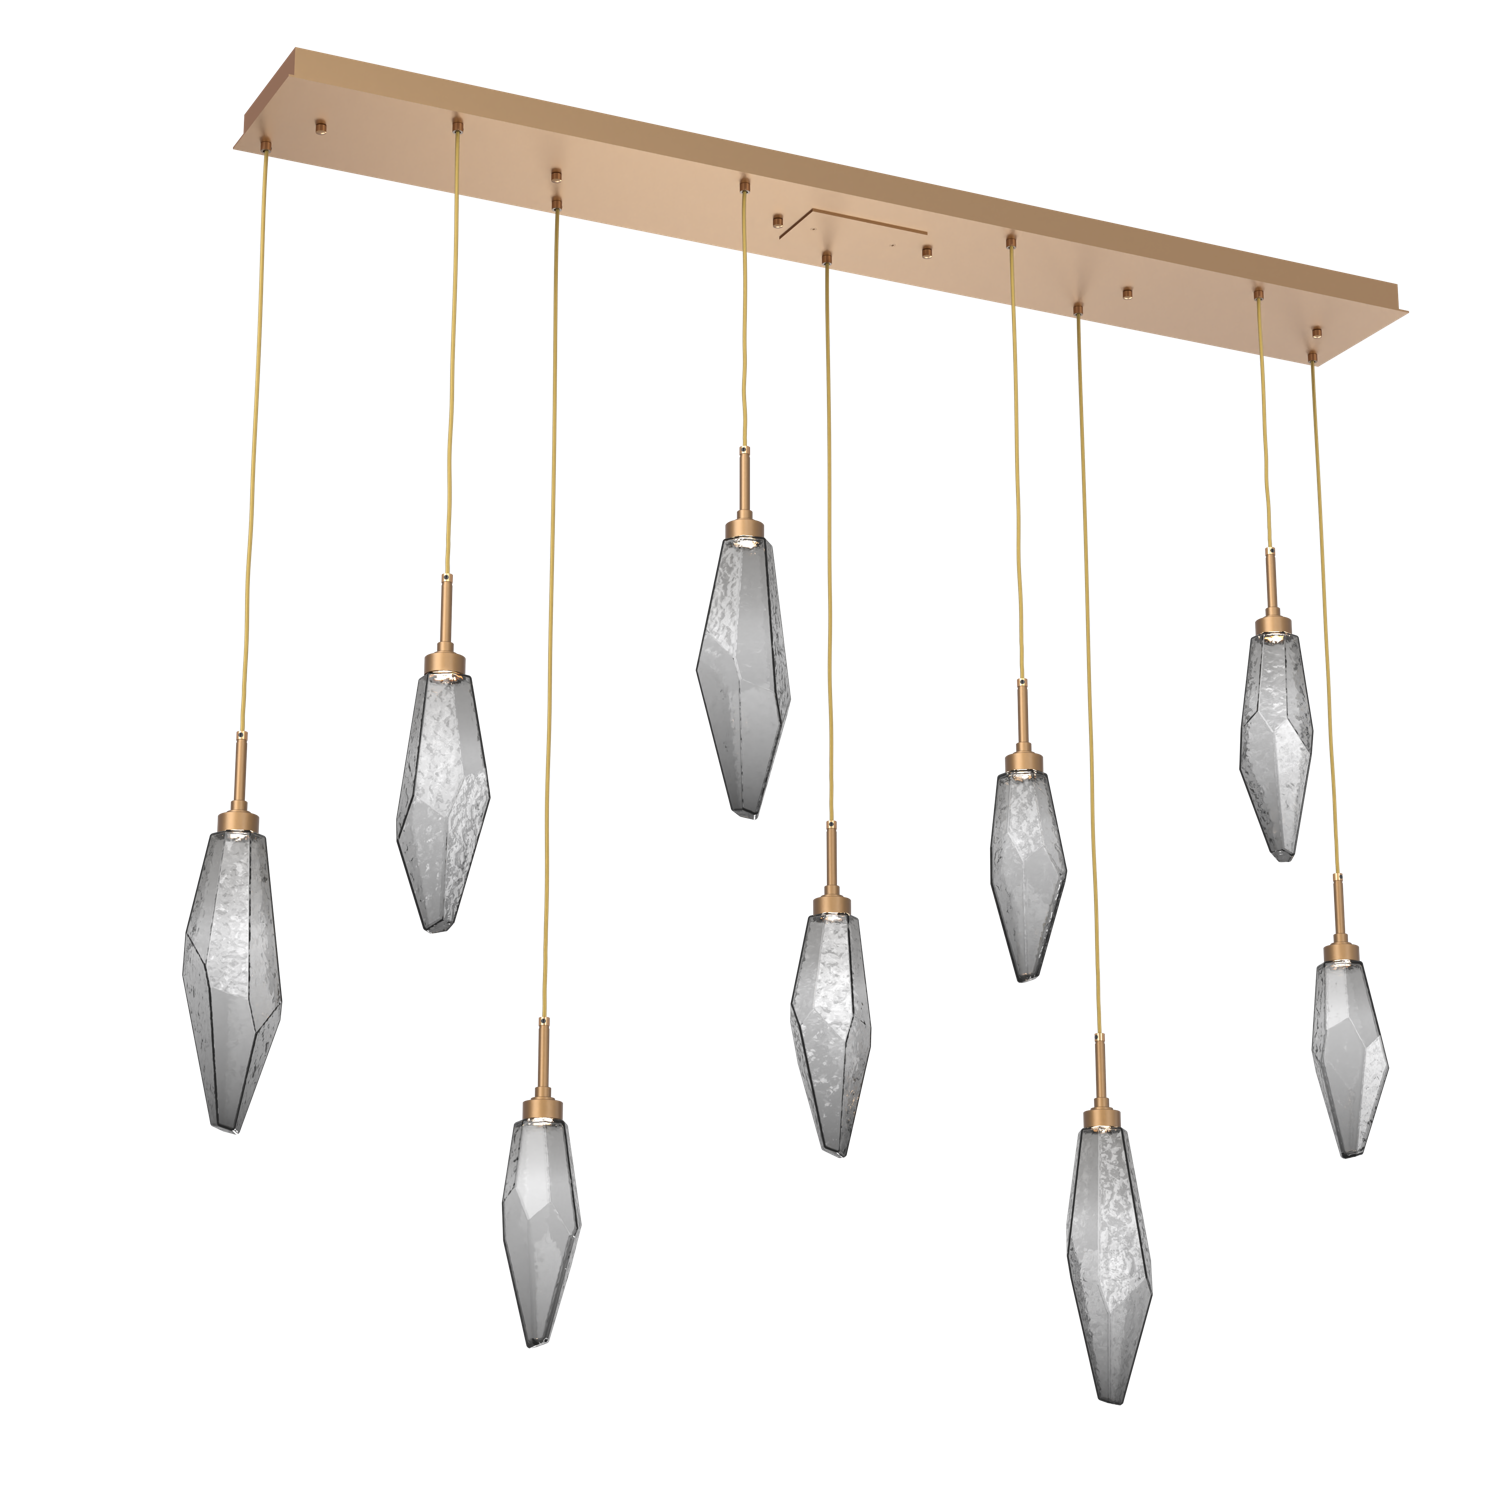 PLB0050-09-NB-CS-Hammerton-Studio-Rock-Crystal-9-light-linear-pendant-chandelier-with-novel-brass-finish-and-chilled-smoke-glass-shades-and-LED-lamping